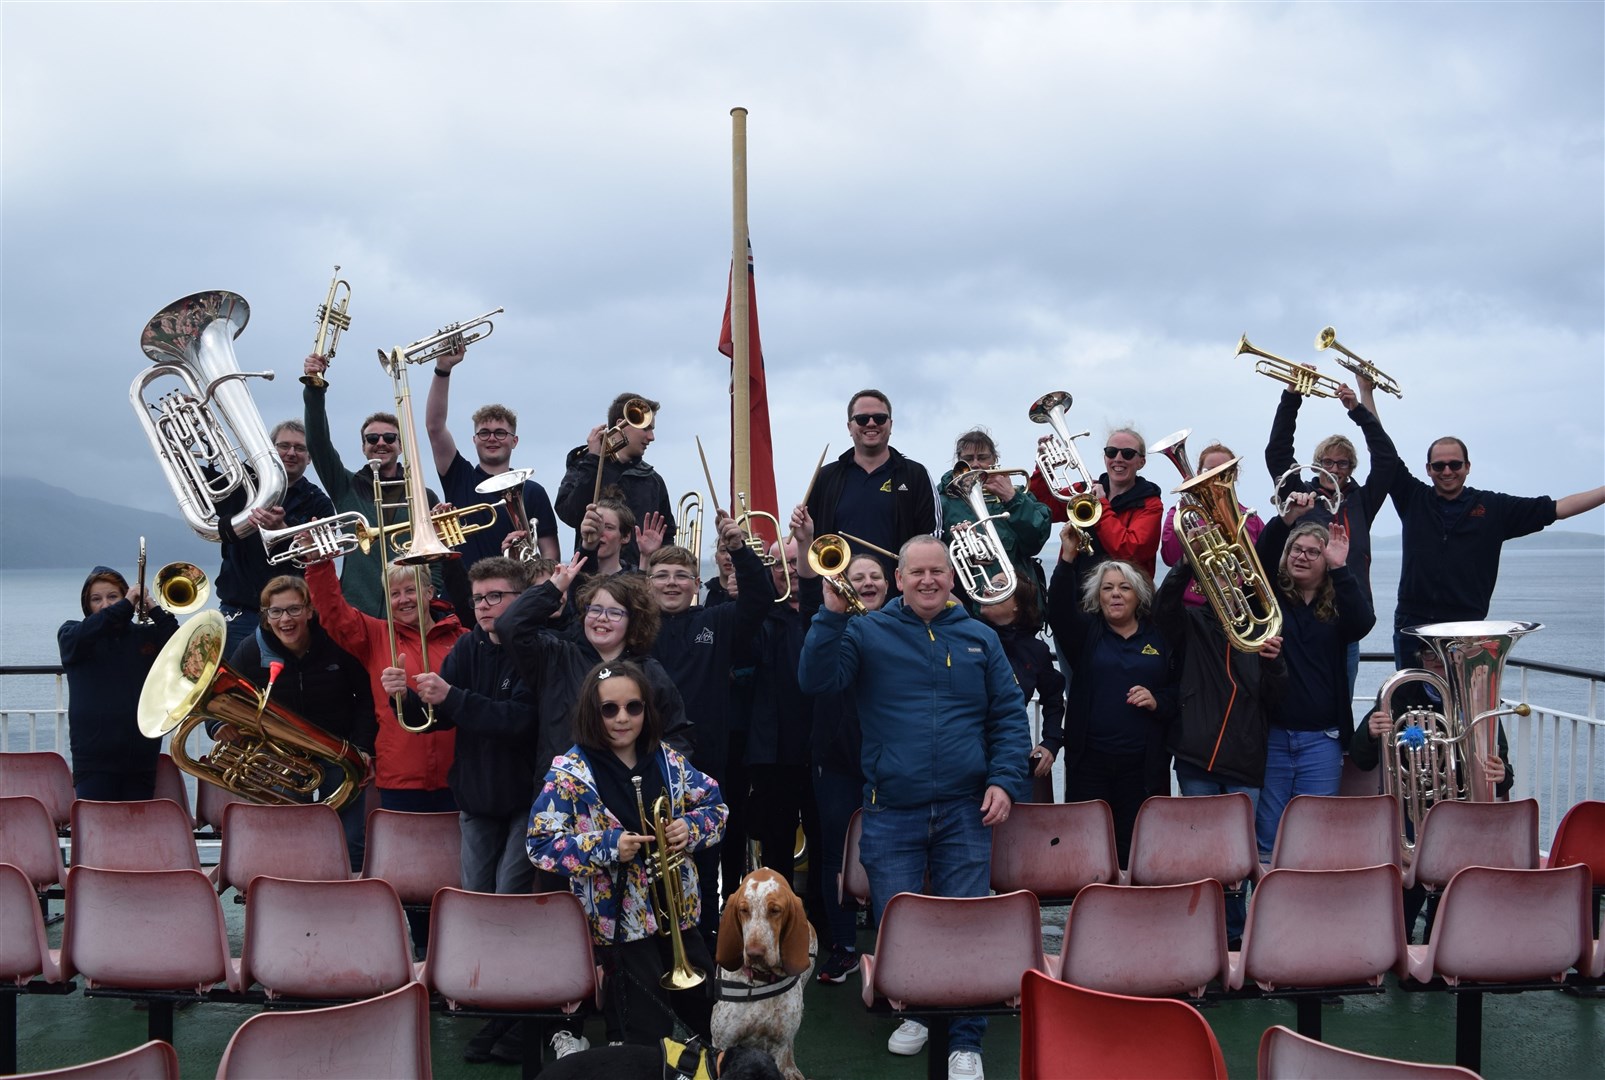 Moray Concert Brass performing on the ferry to Mull during a tour.